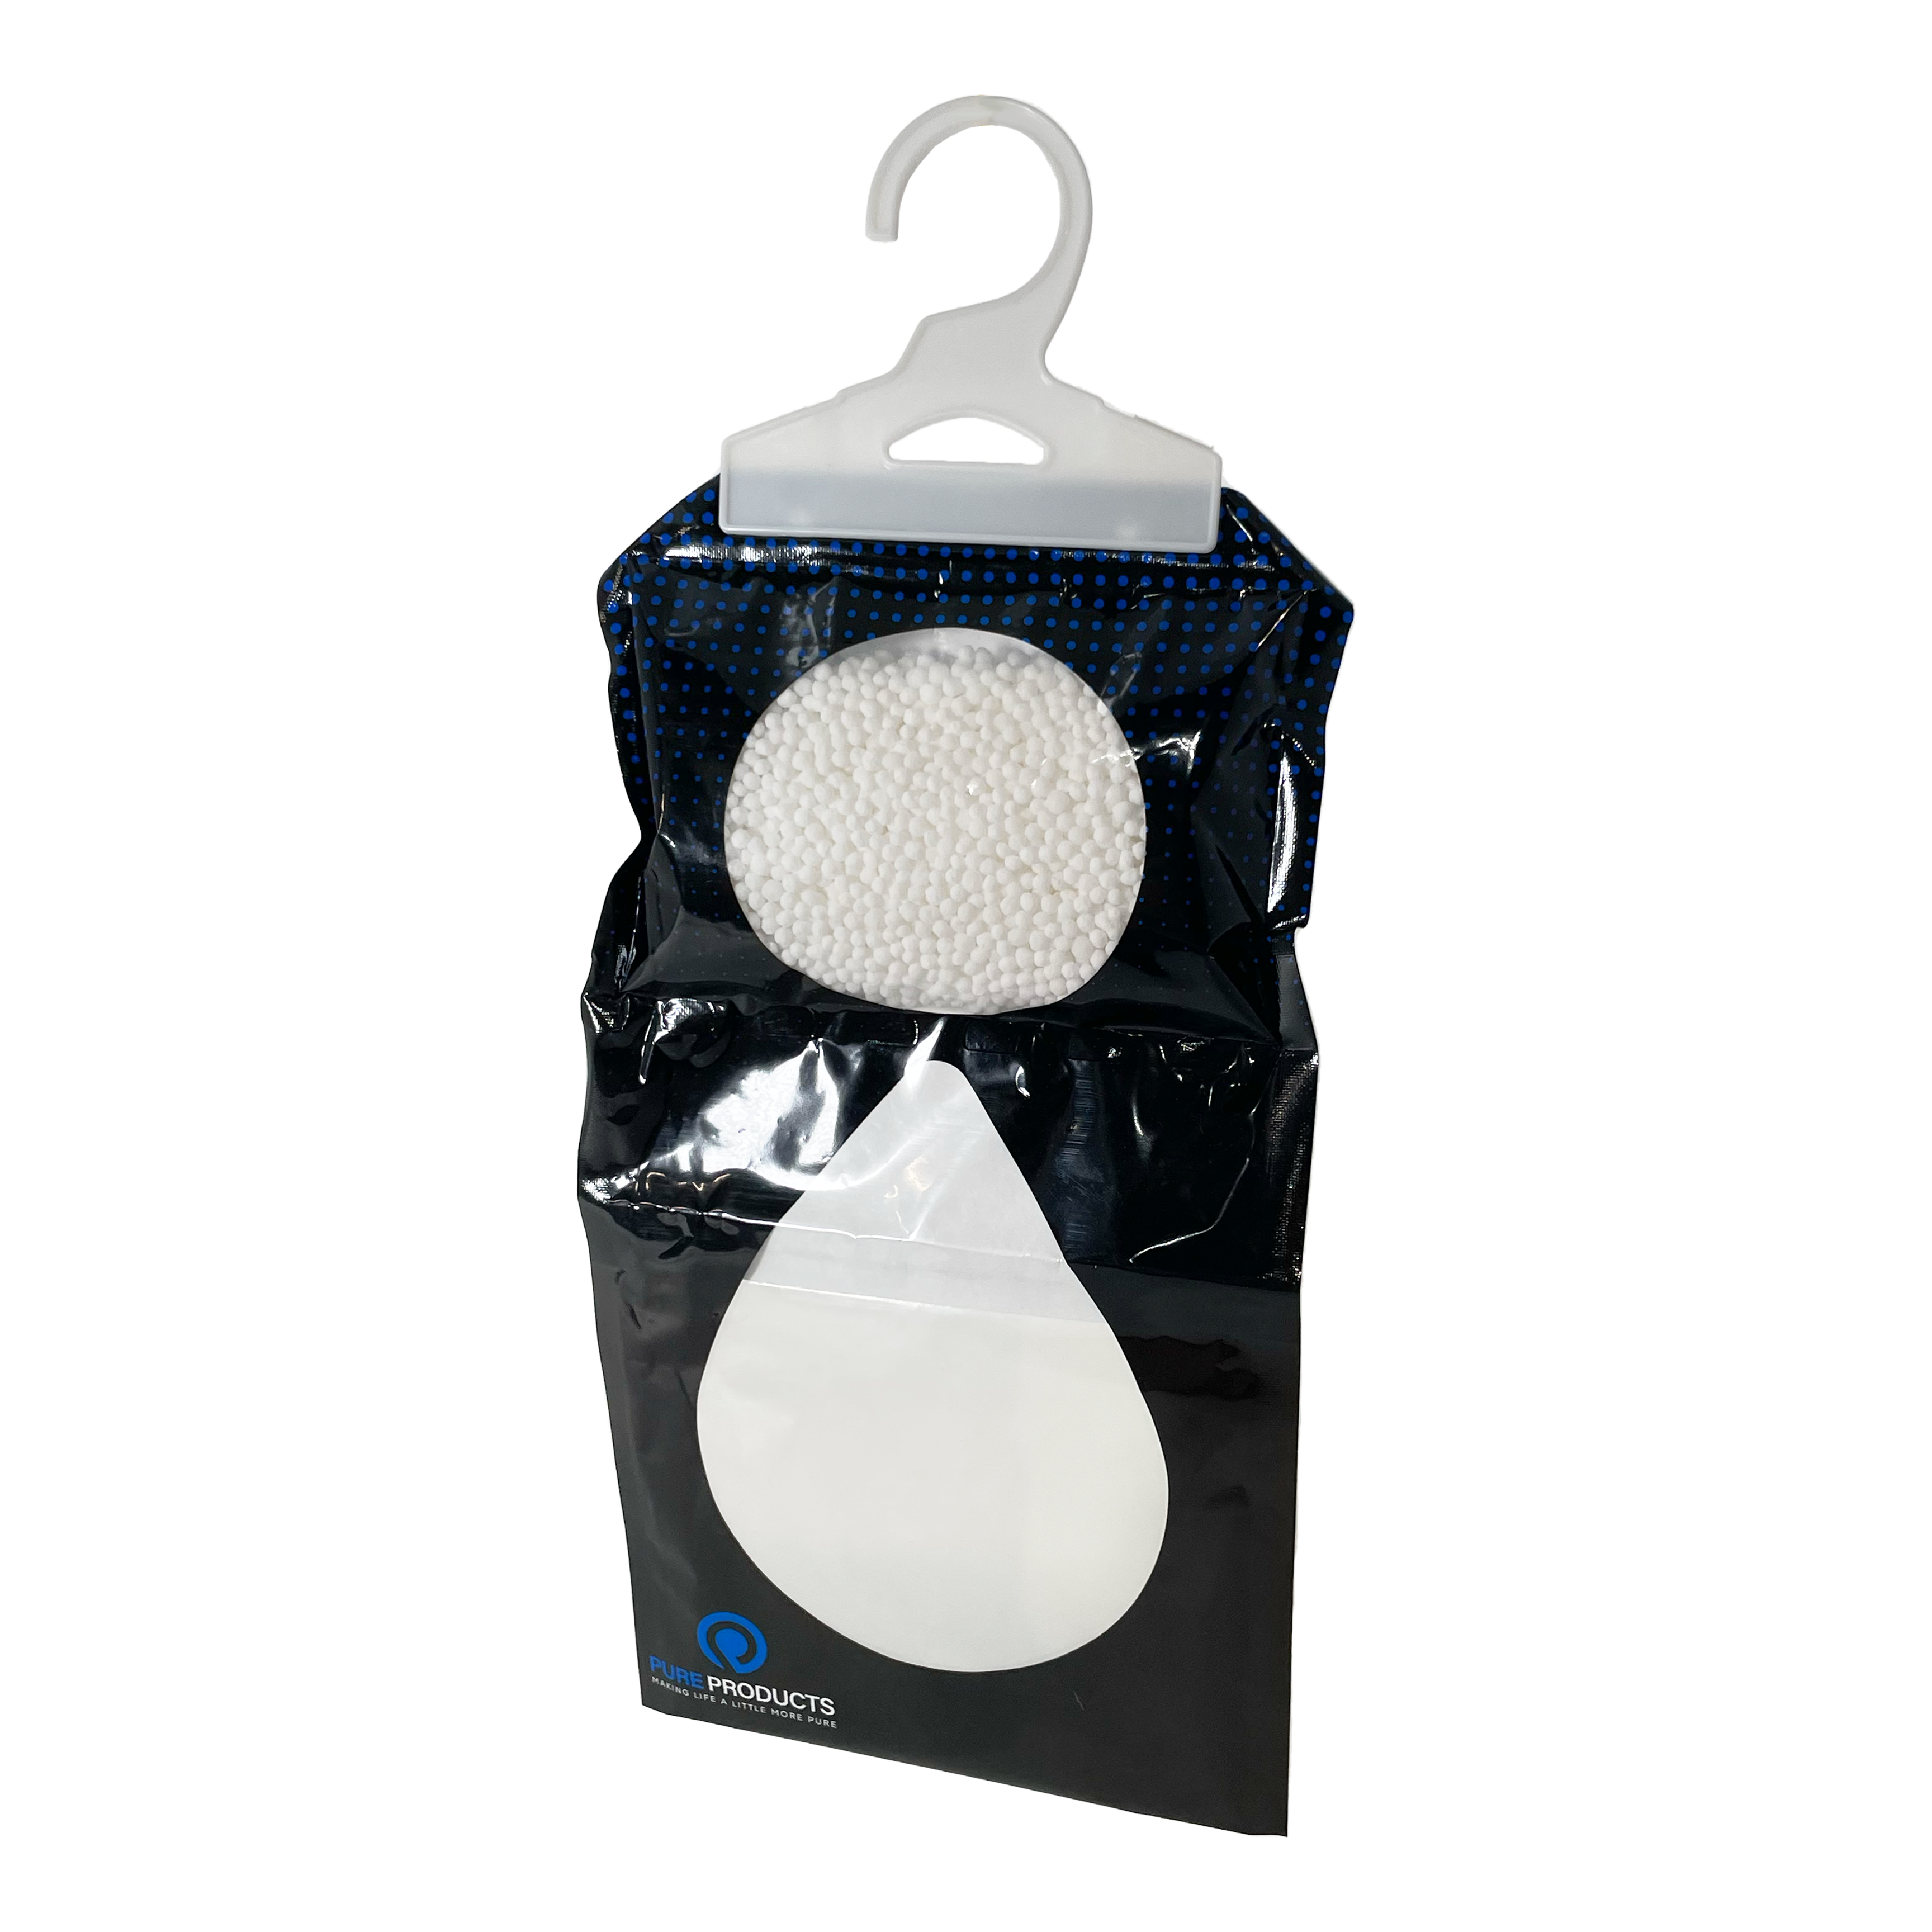 Dehumidifier - moisture collecting pouch